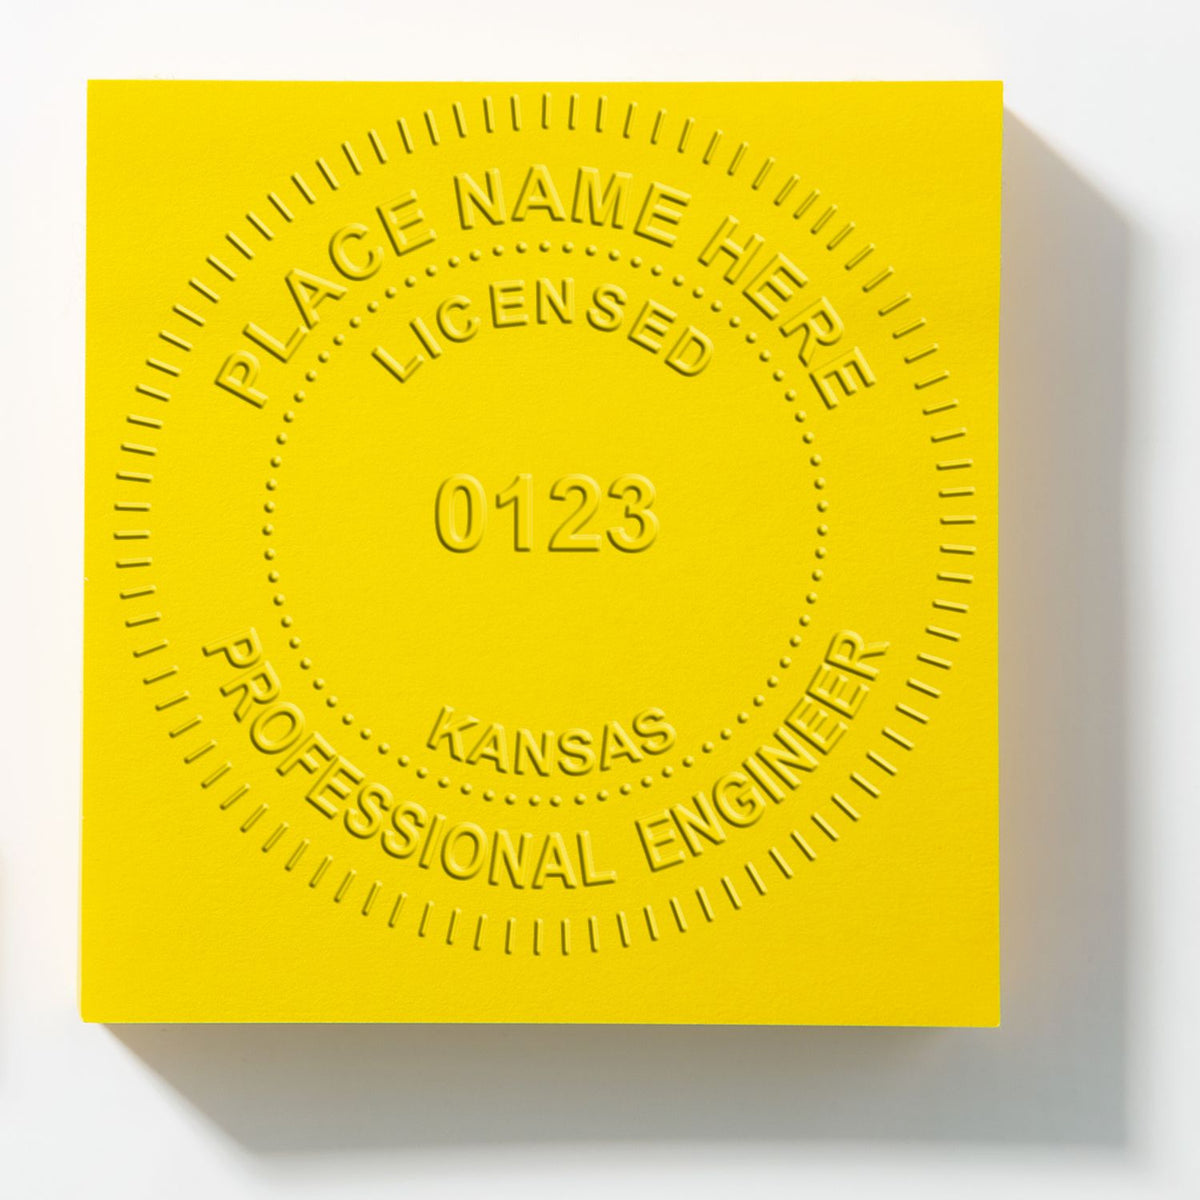 An in use photo of the Gift Kansas Engineer Seal showing a sample imprint on a cardstock